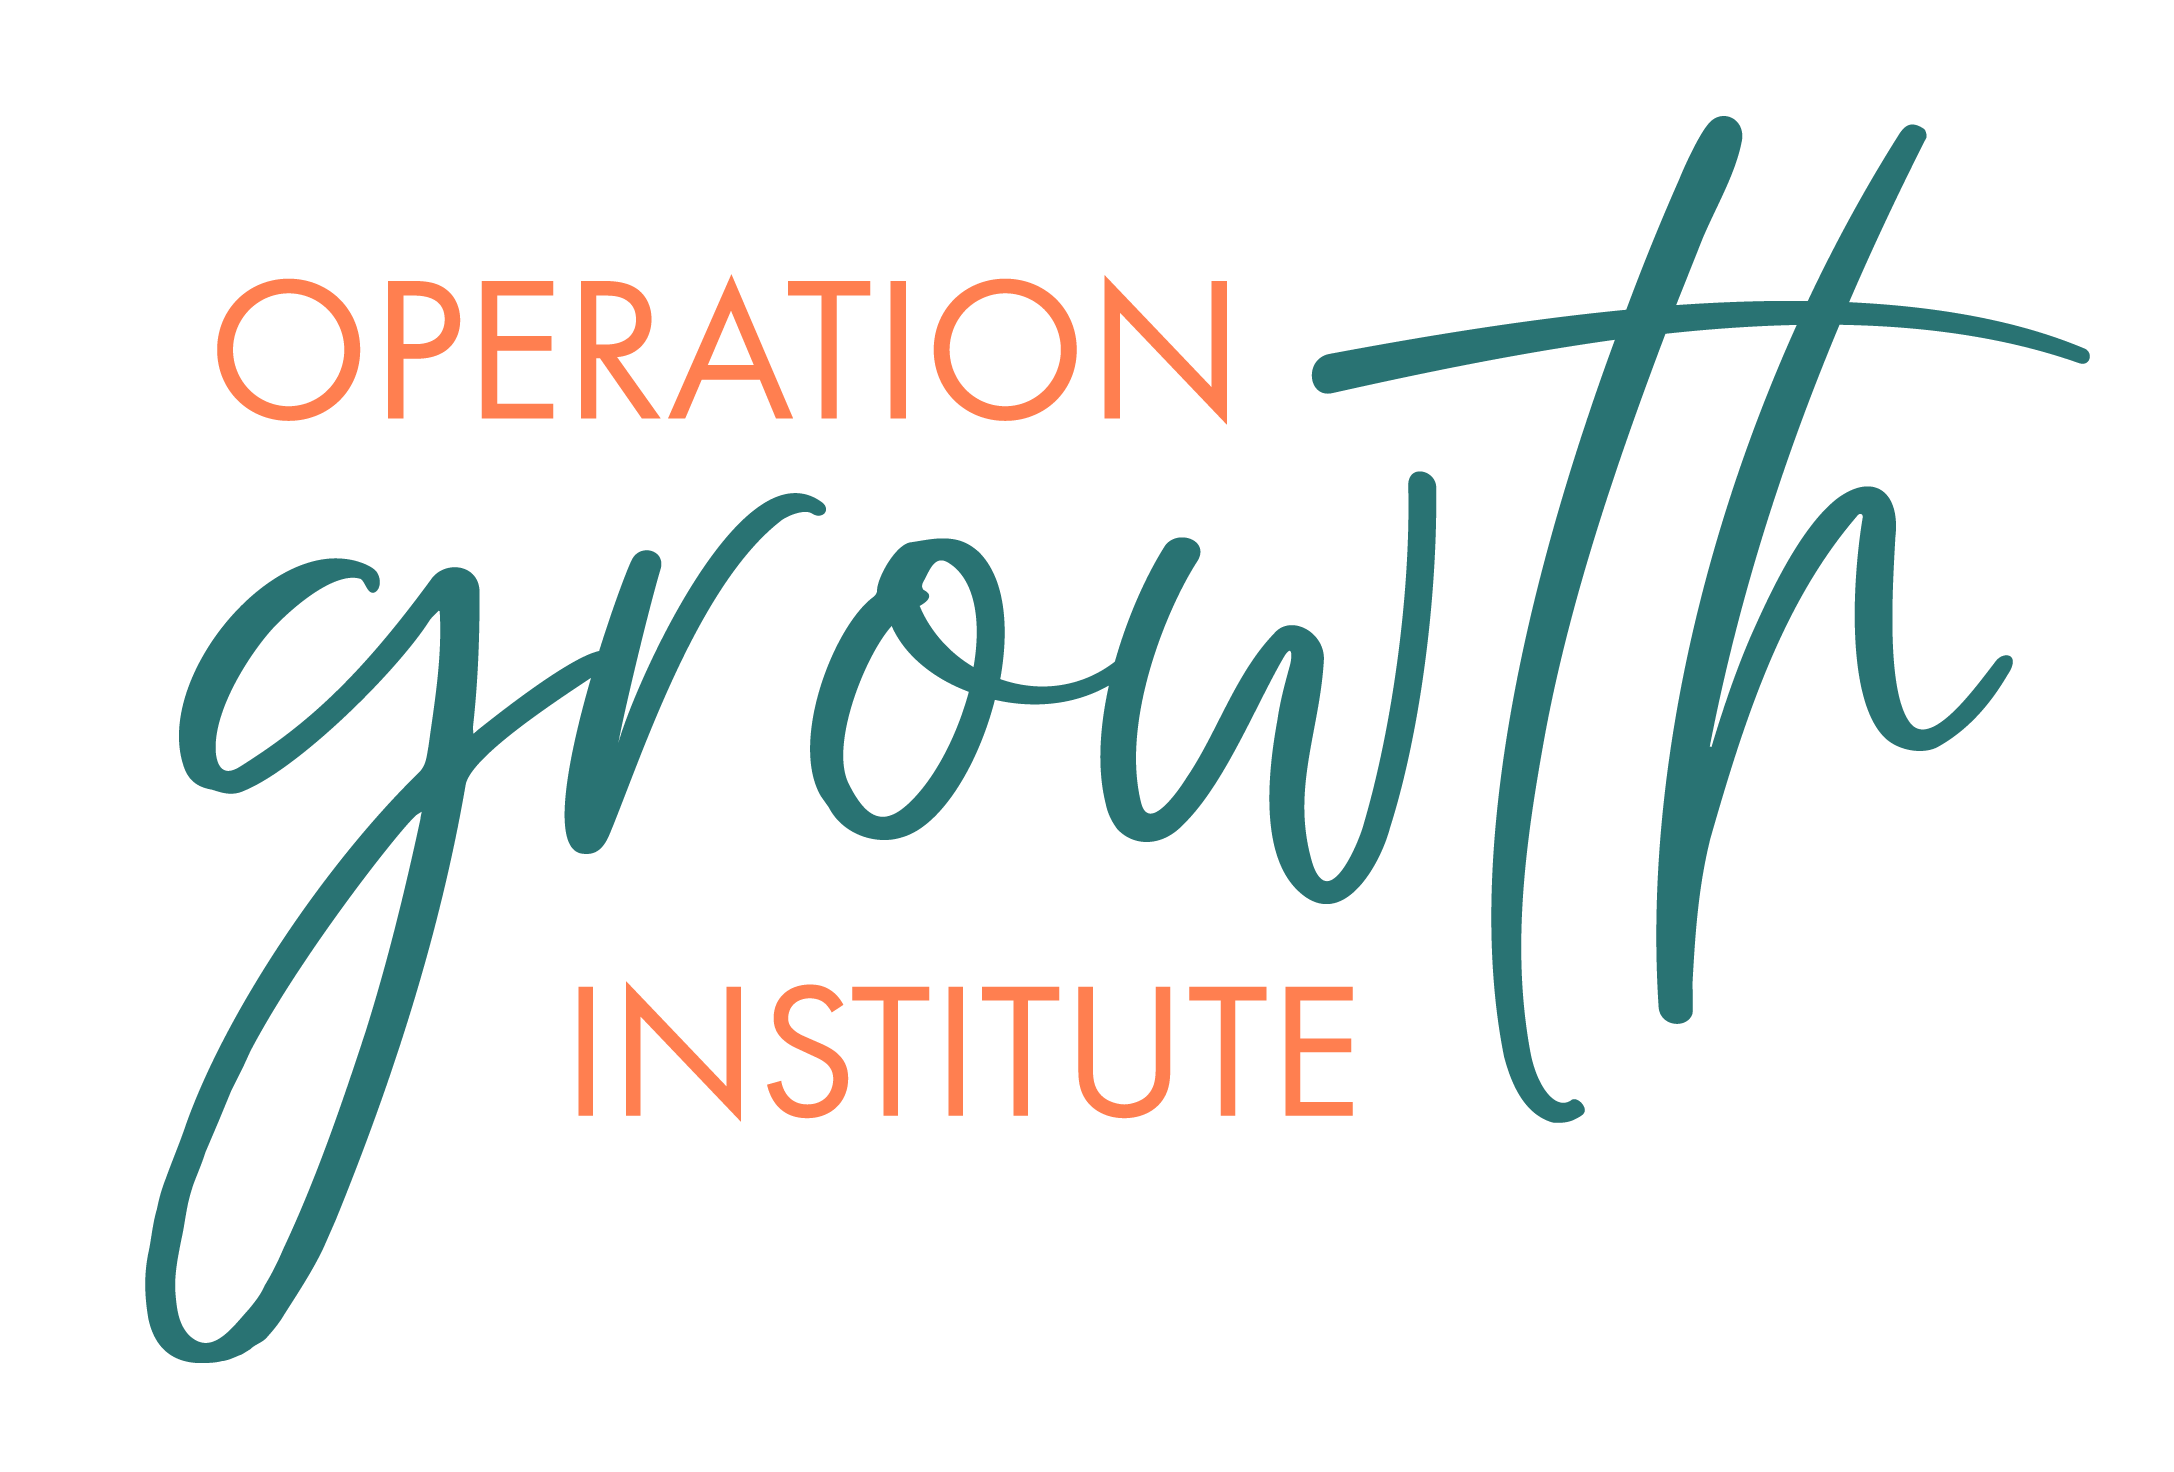 Operation Growth Institute